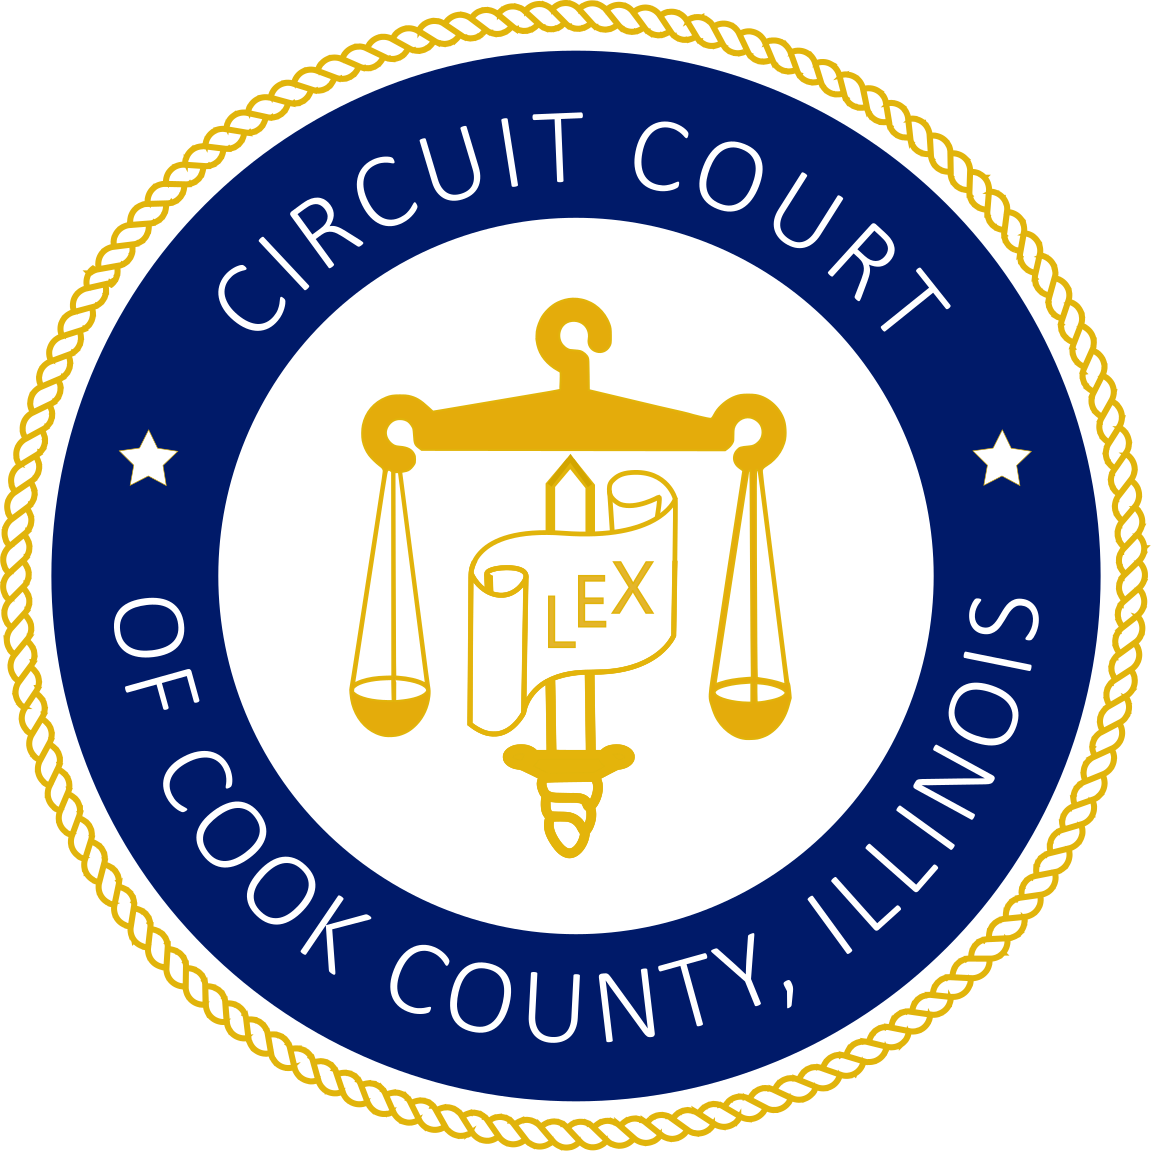 Office of the Clerk of Circuit Court of Cook County